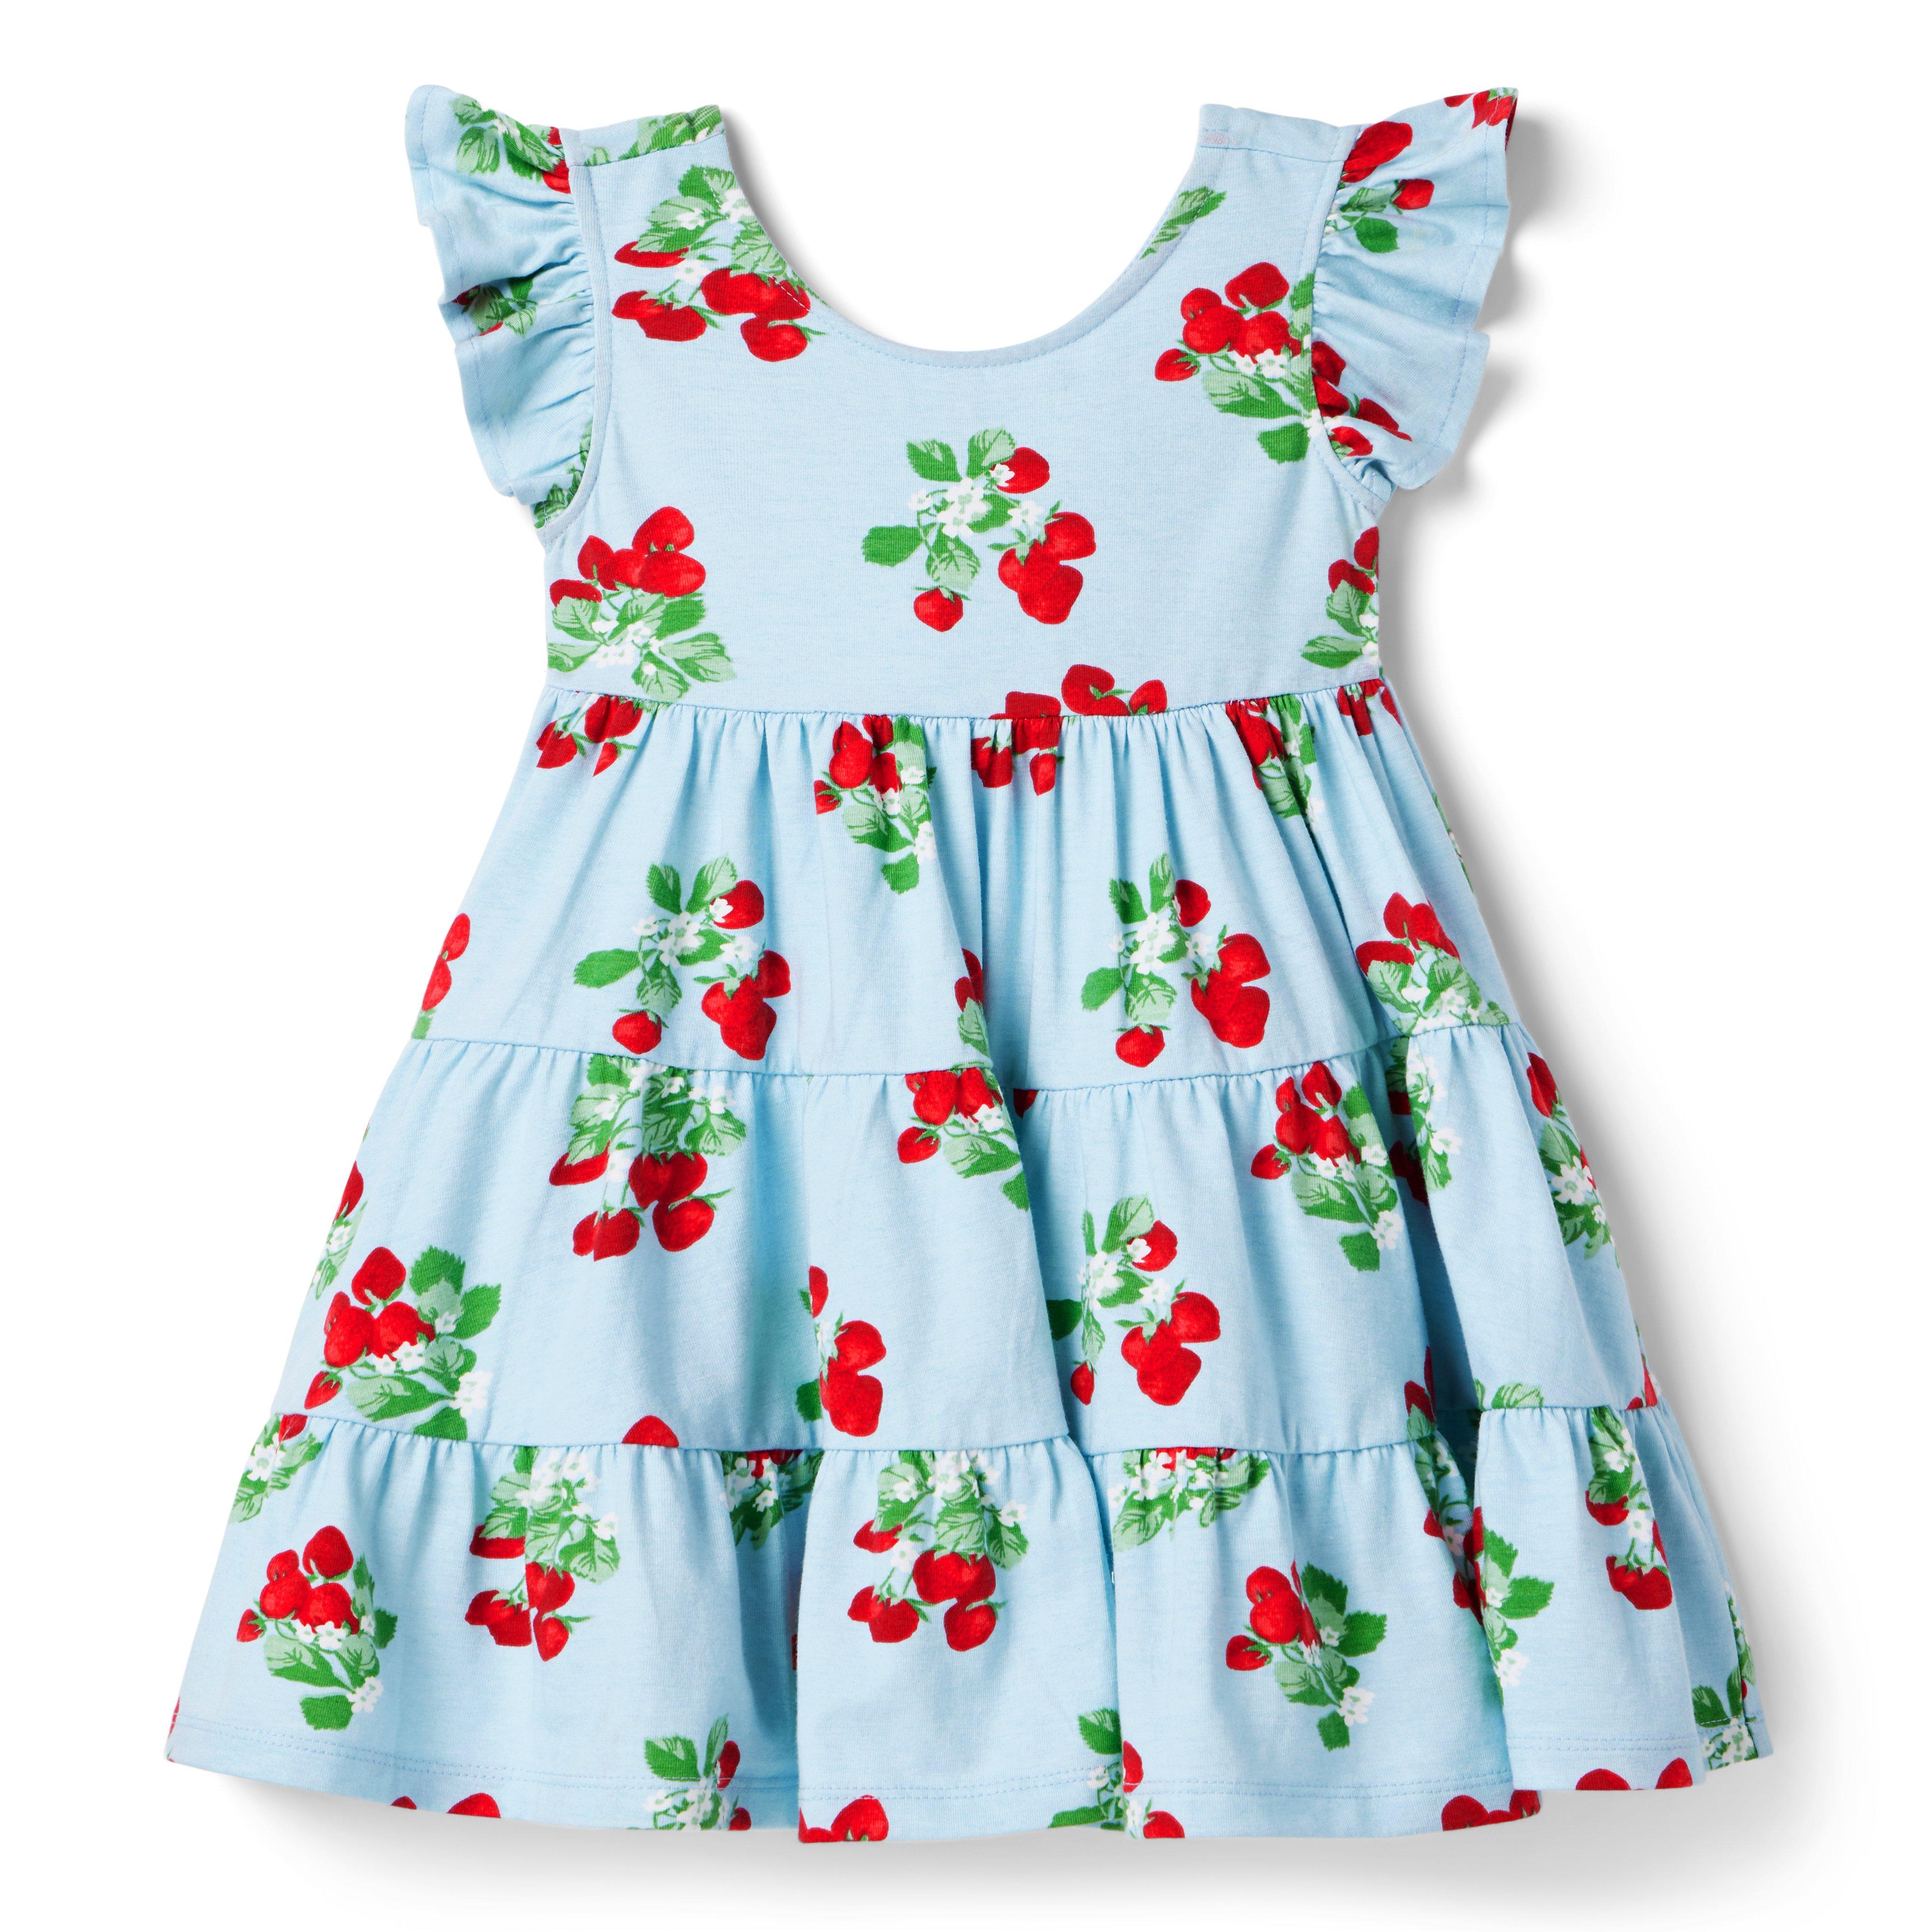 Janie's Dress Shop for Girls at Janie and Jack